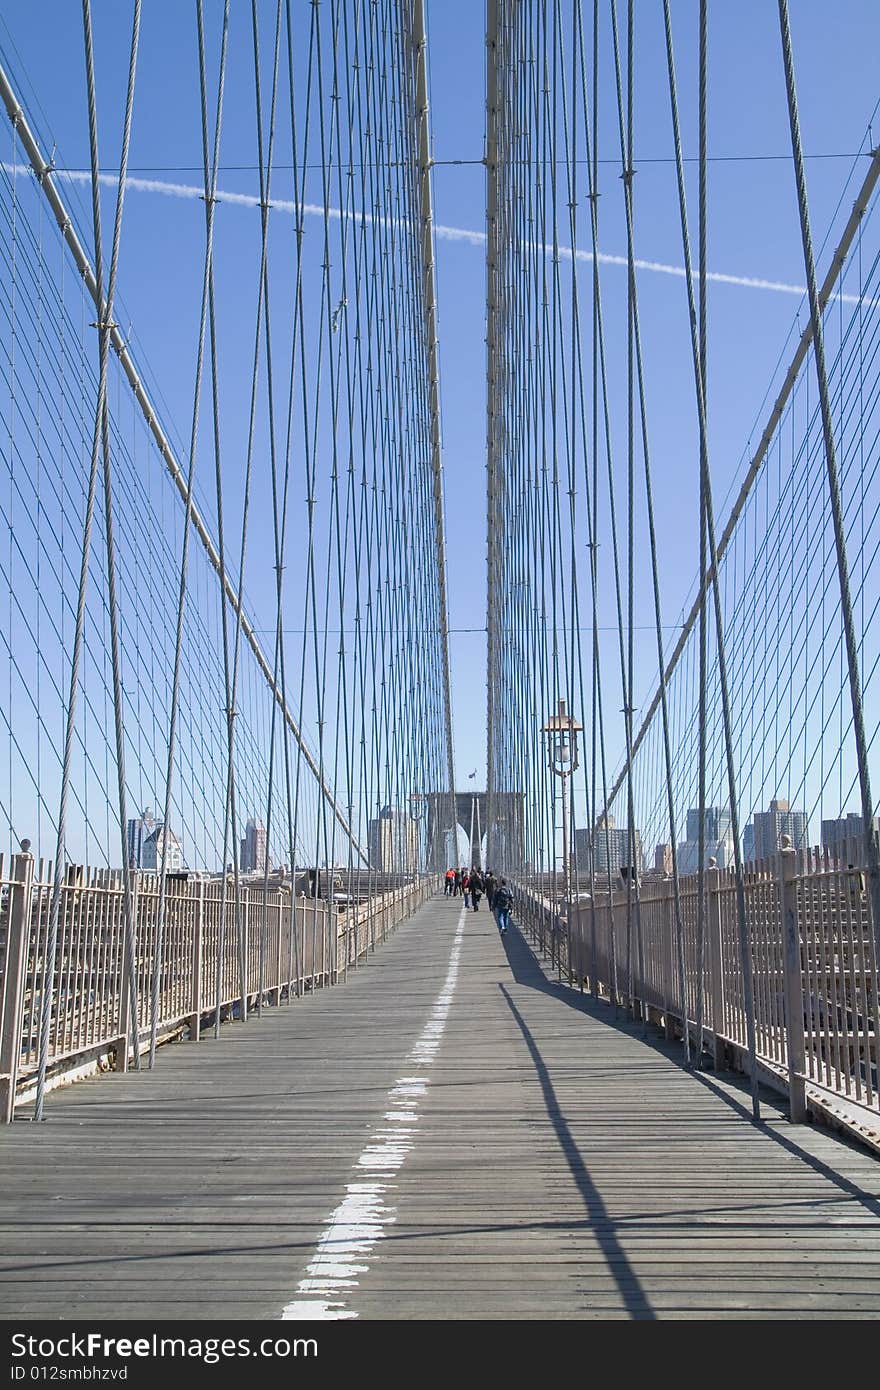 View of the lane used by the pedestrians on Brooklyn Bridge